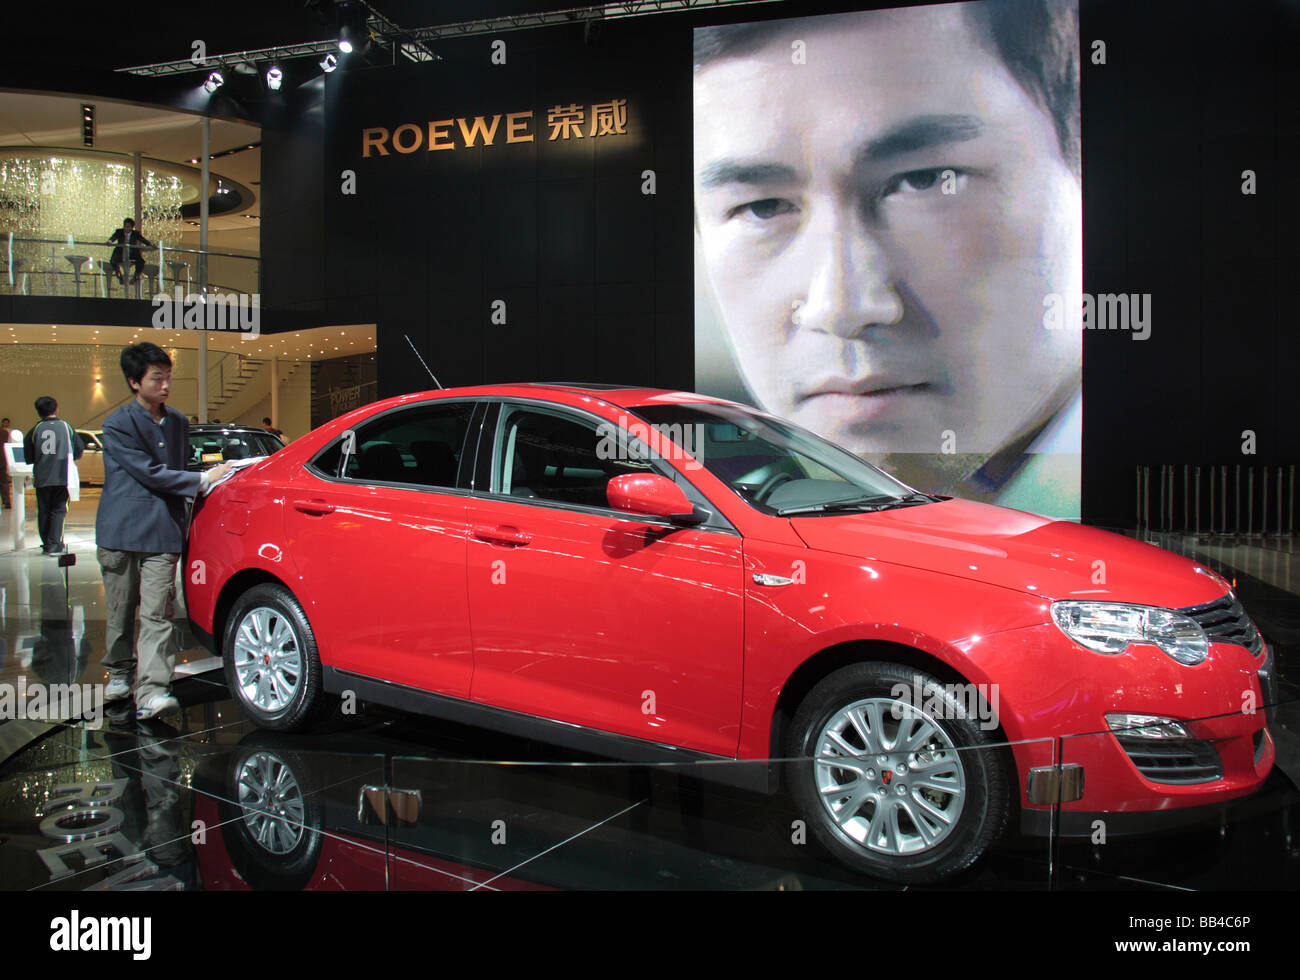 Roewe car on display at Beijing auto show. Stock Photo